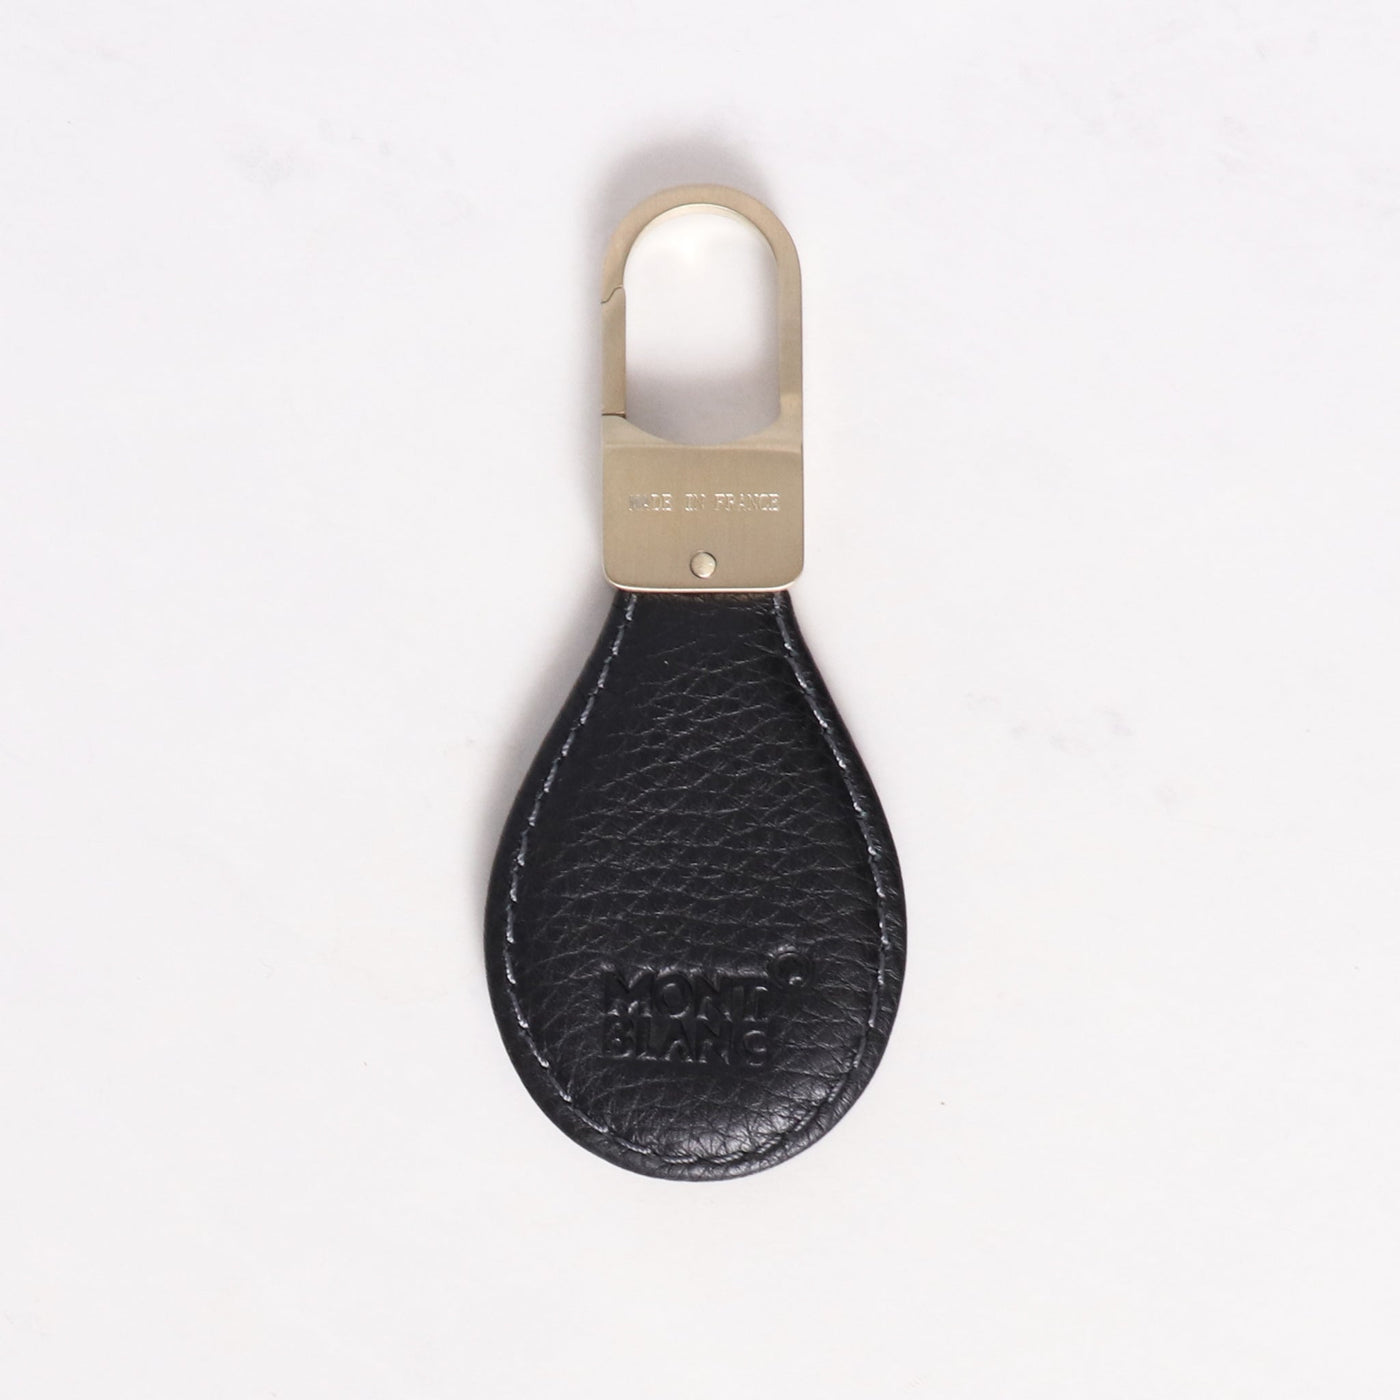 Montblanc Leather Goods Black Key Ring - Preowned